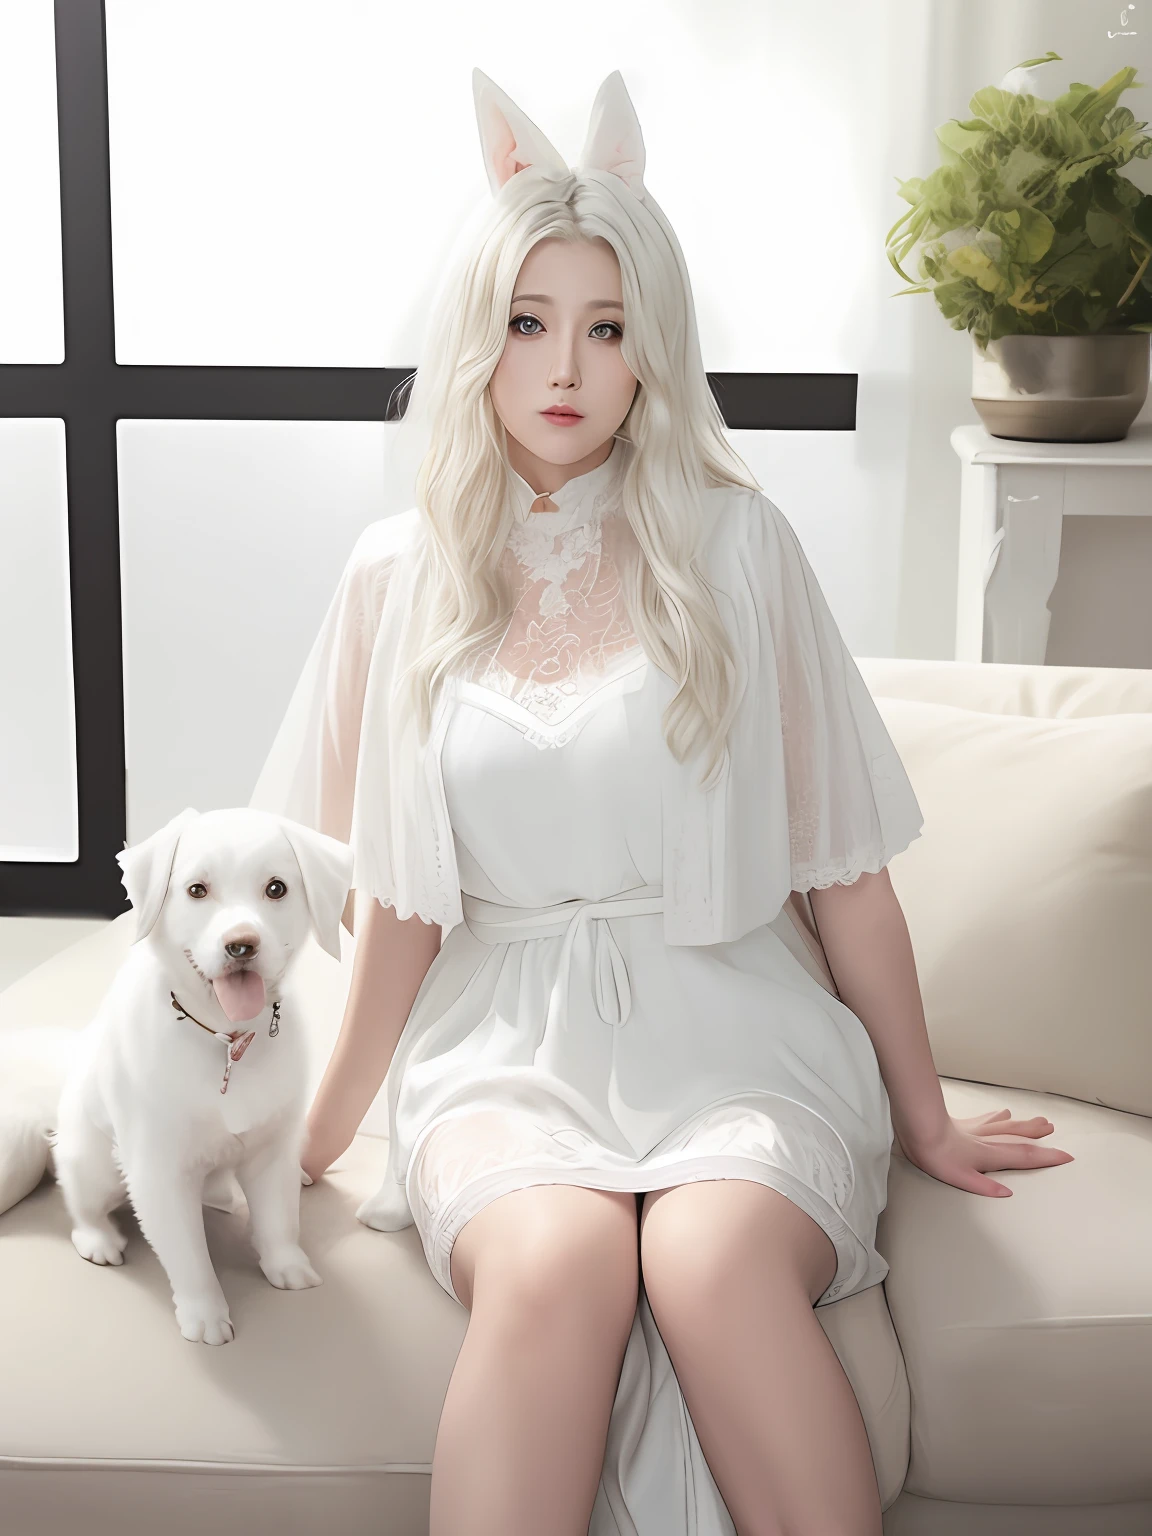 Photo of Alafard of a white dog sitting on a sofa, small white dog at her side, Middle metaverse, awww, Chiba Yuda, o cachorrinho, Wang Chen, Cute dog, Weibo, Cai Xukun, White-haired, qiangshu, very cute features